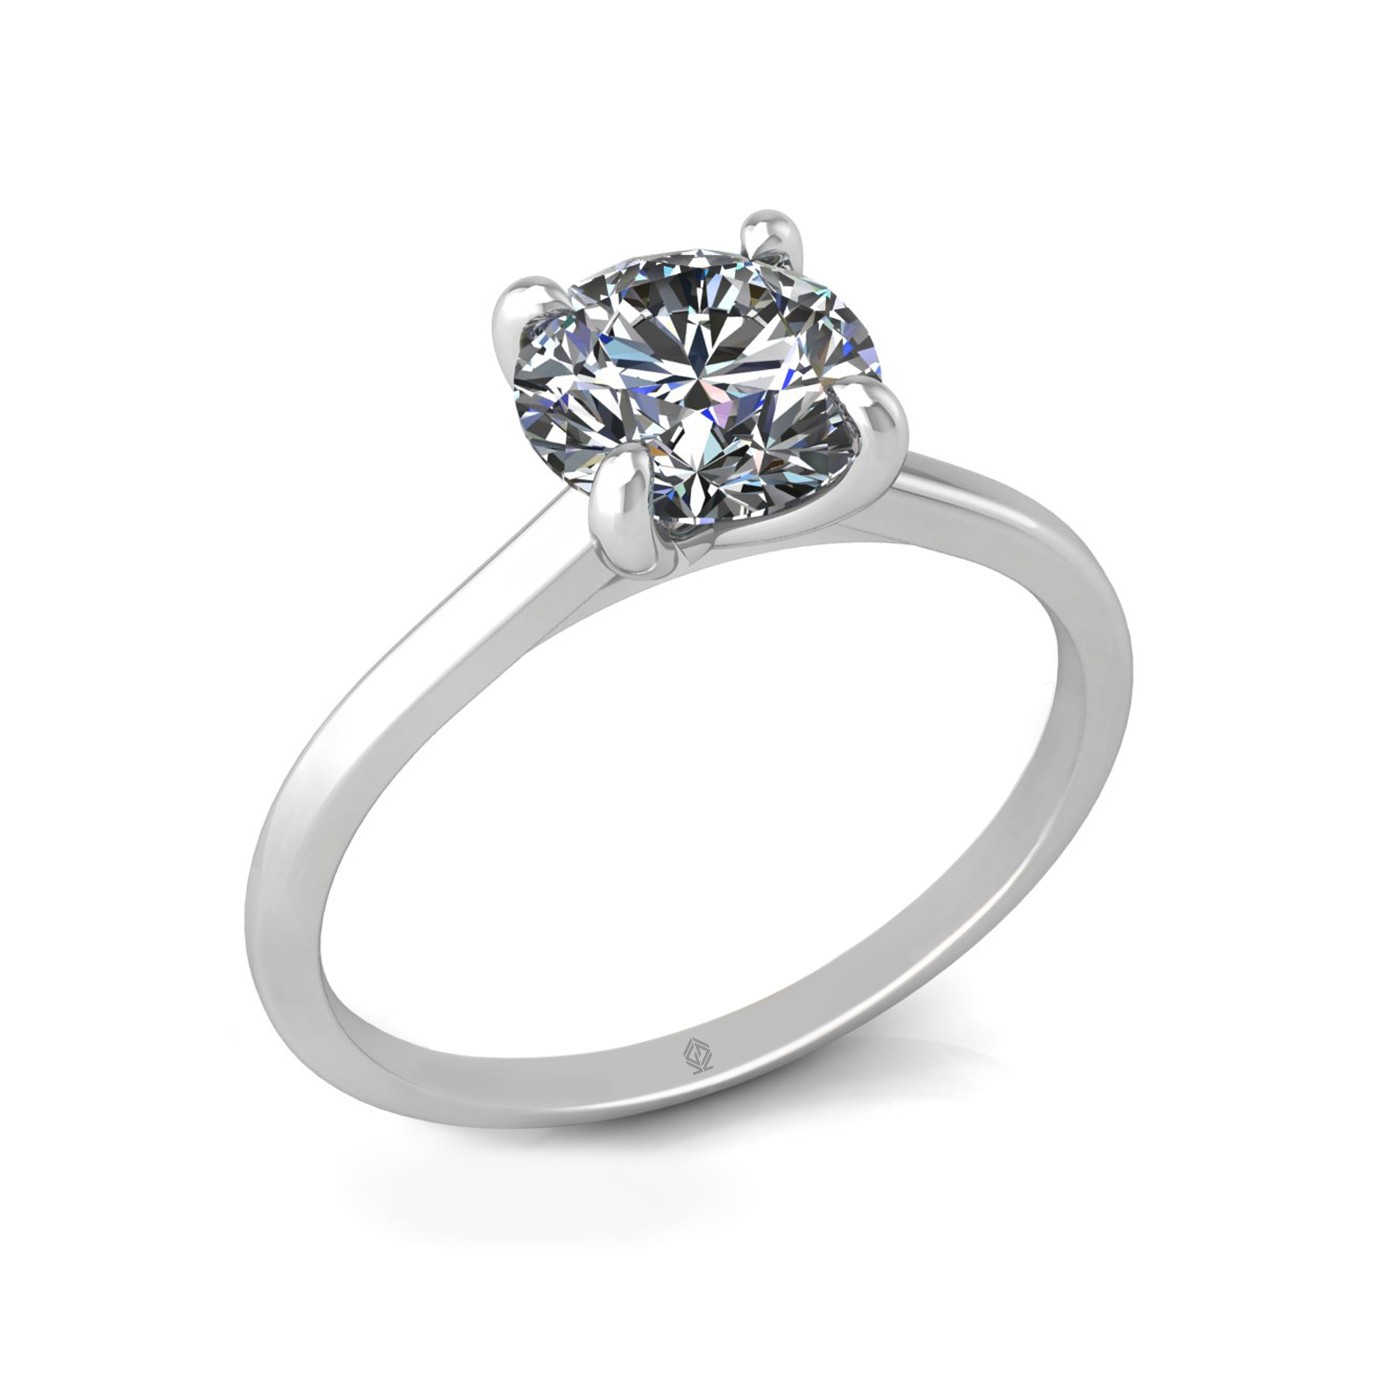 18k white gold 1.2ct 4 prongs solitaire round cut diamond engagement ring with whisper thin band